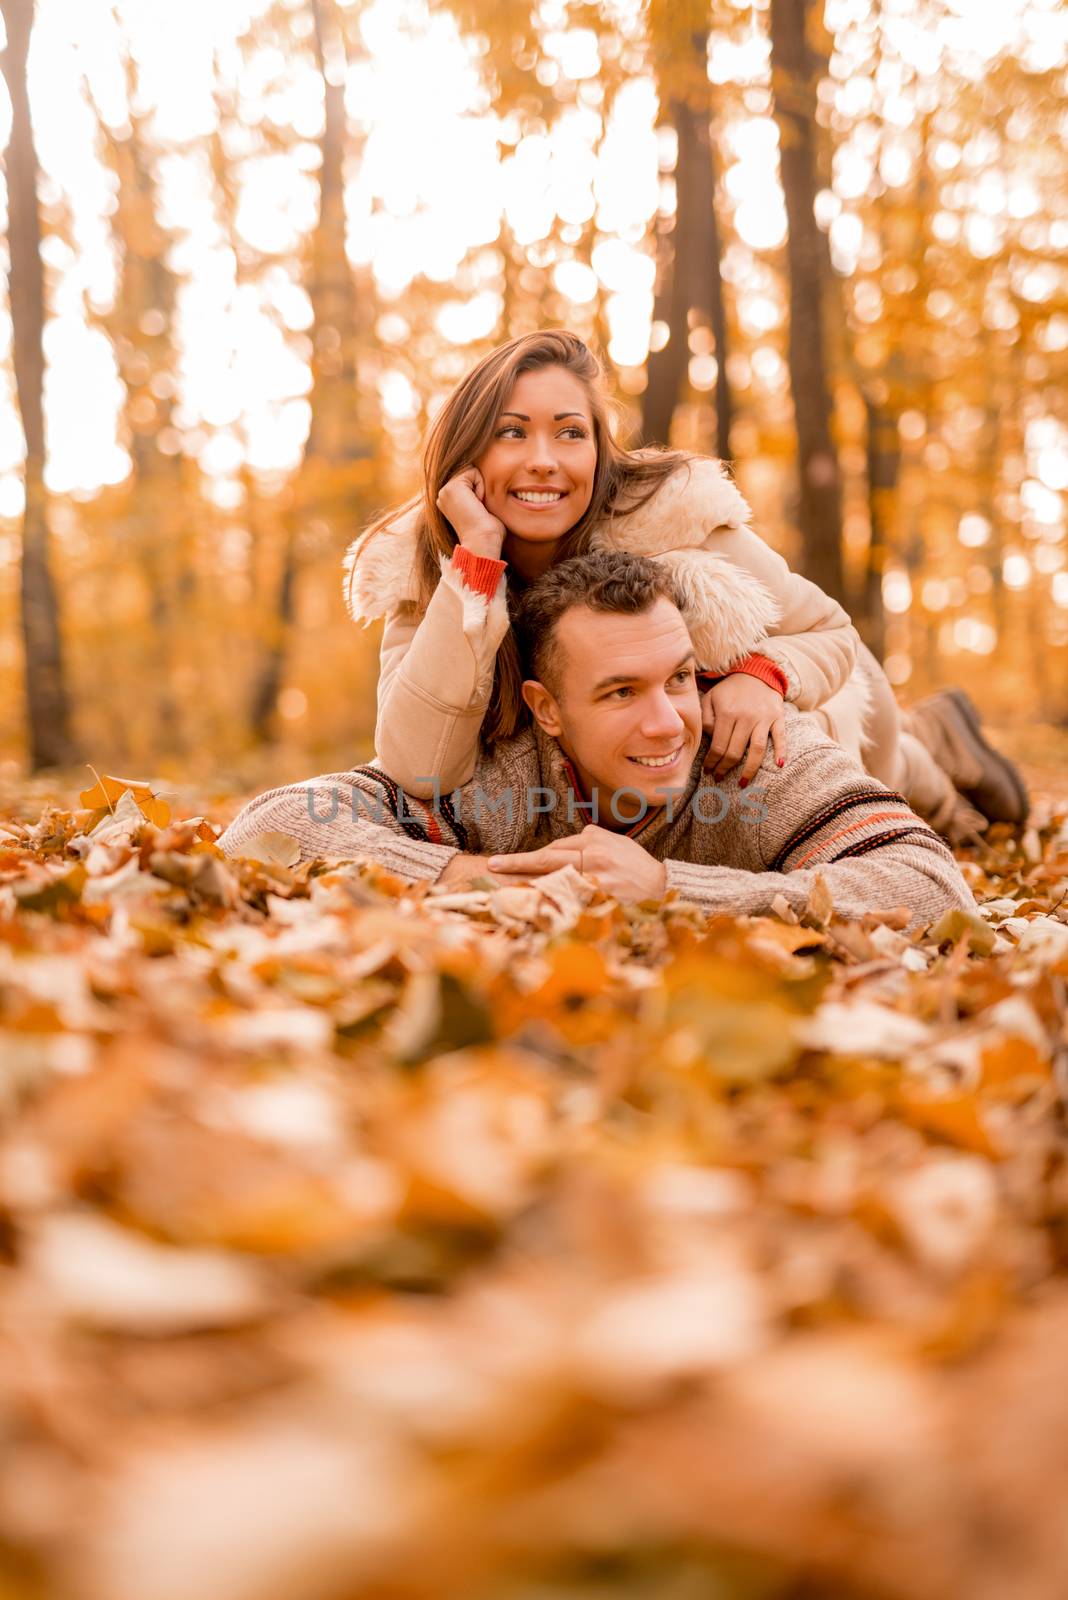 Beautiful smiling couple enjoying in sunny forest in autumn colors. They are lying on the falls leaves and looking away.